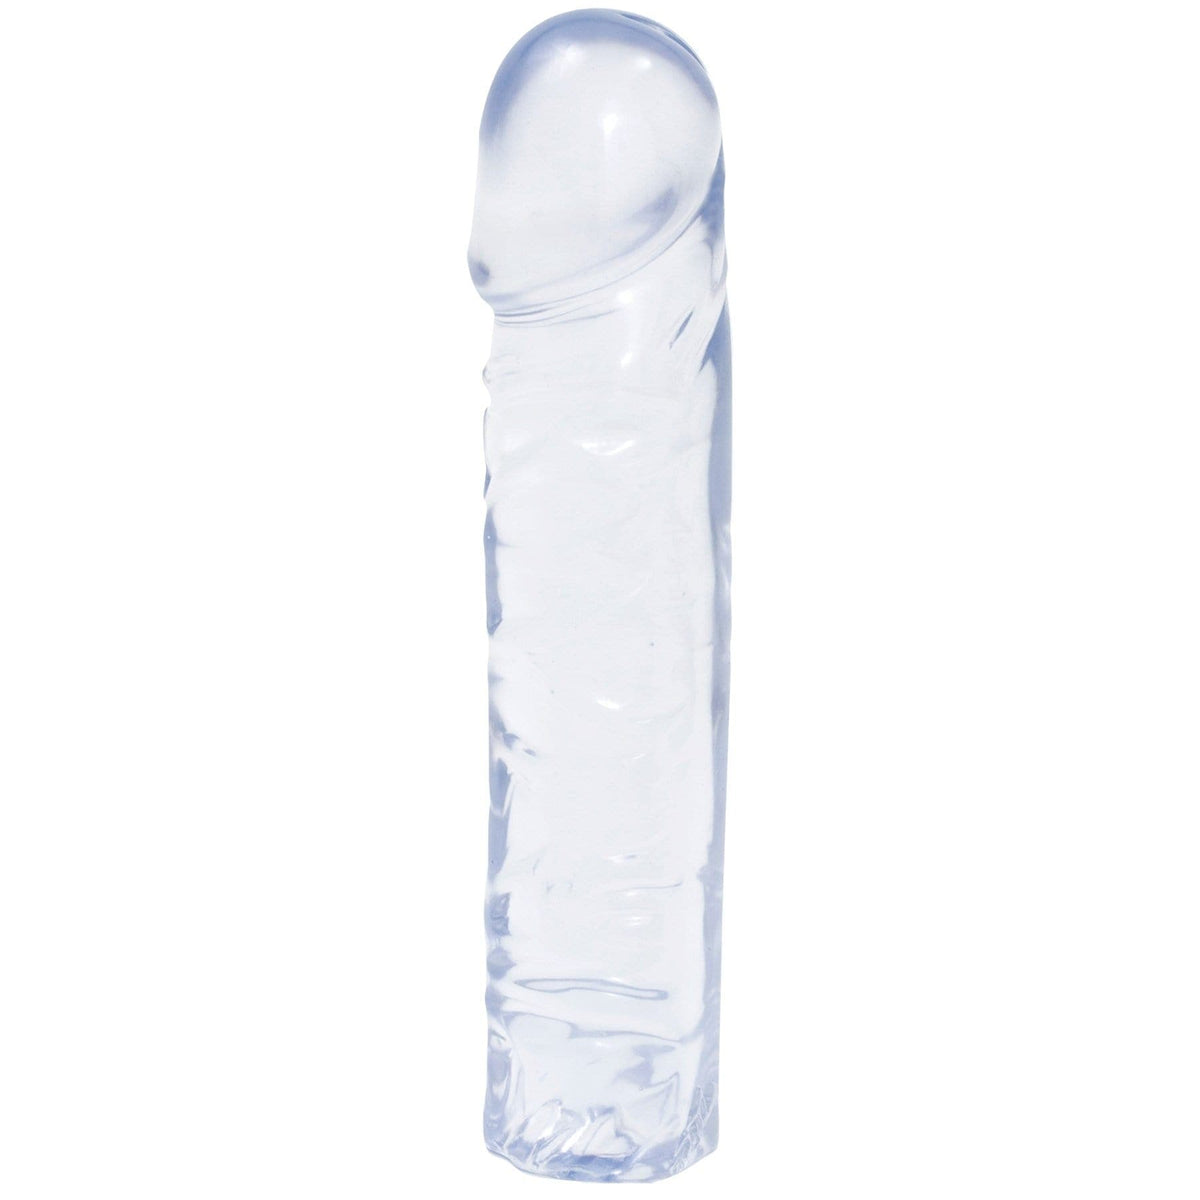 crystal jellies classic dong 8 inch clear